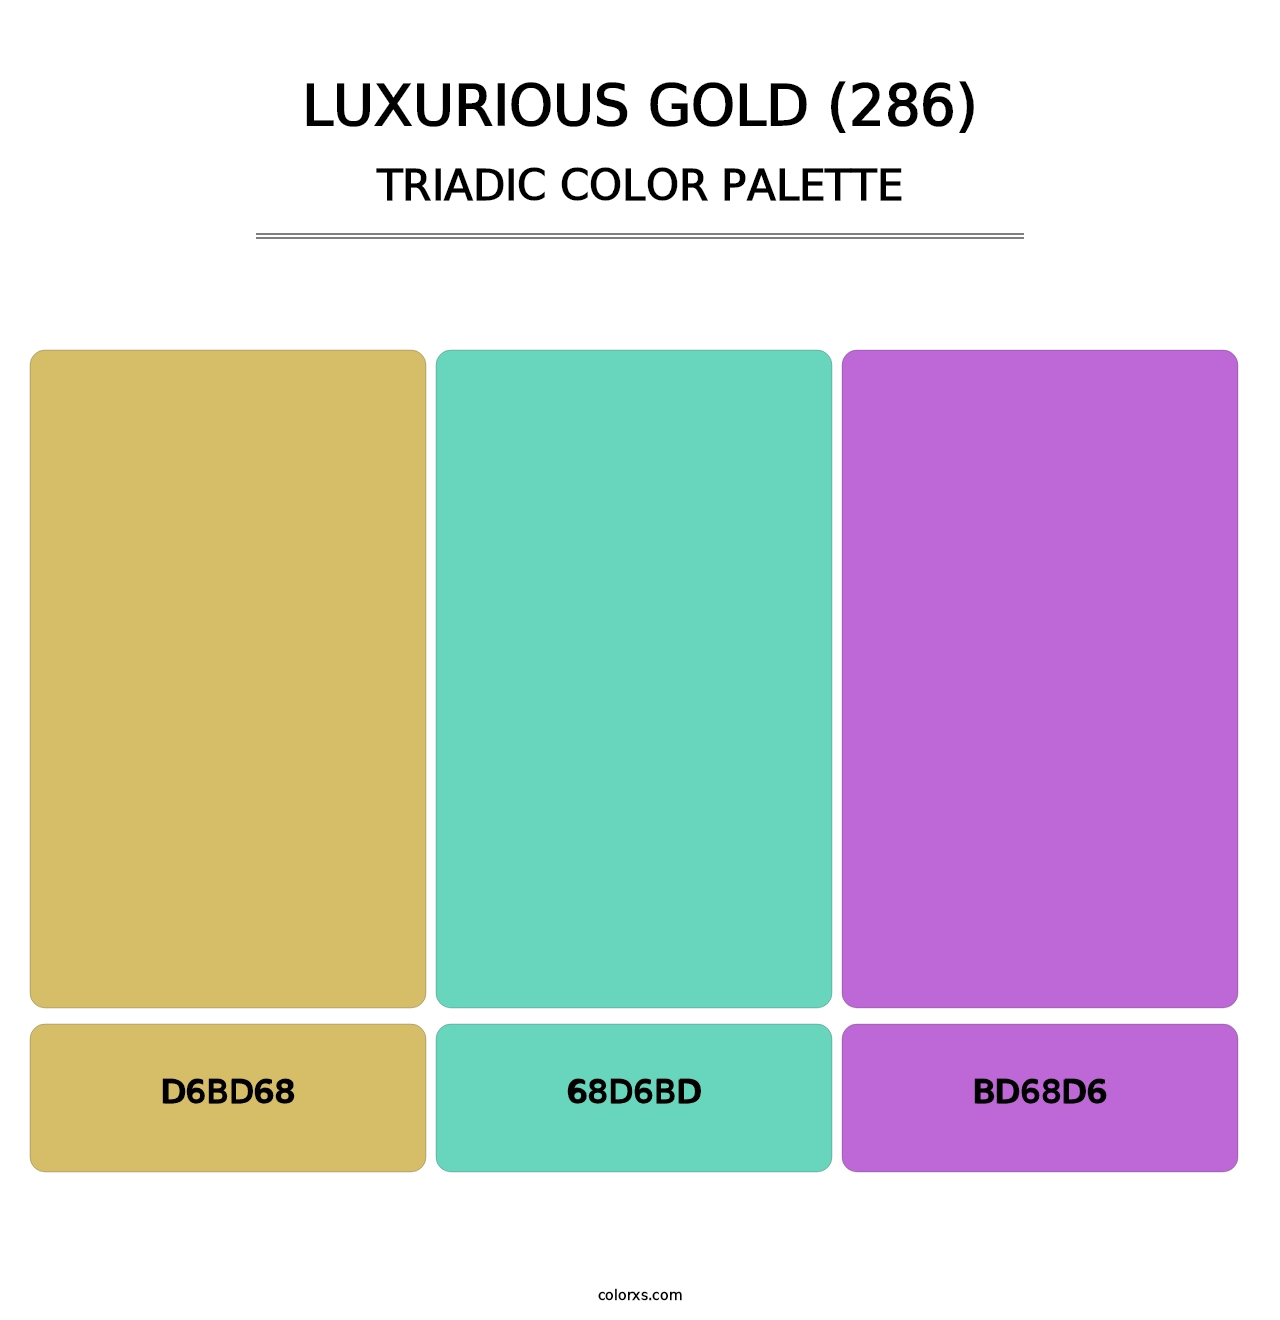 Luxurious Gold (286) - Triadic Color Palette